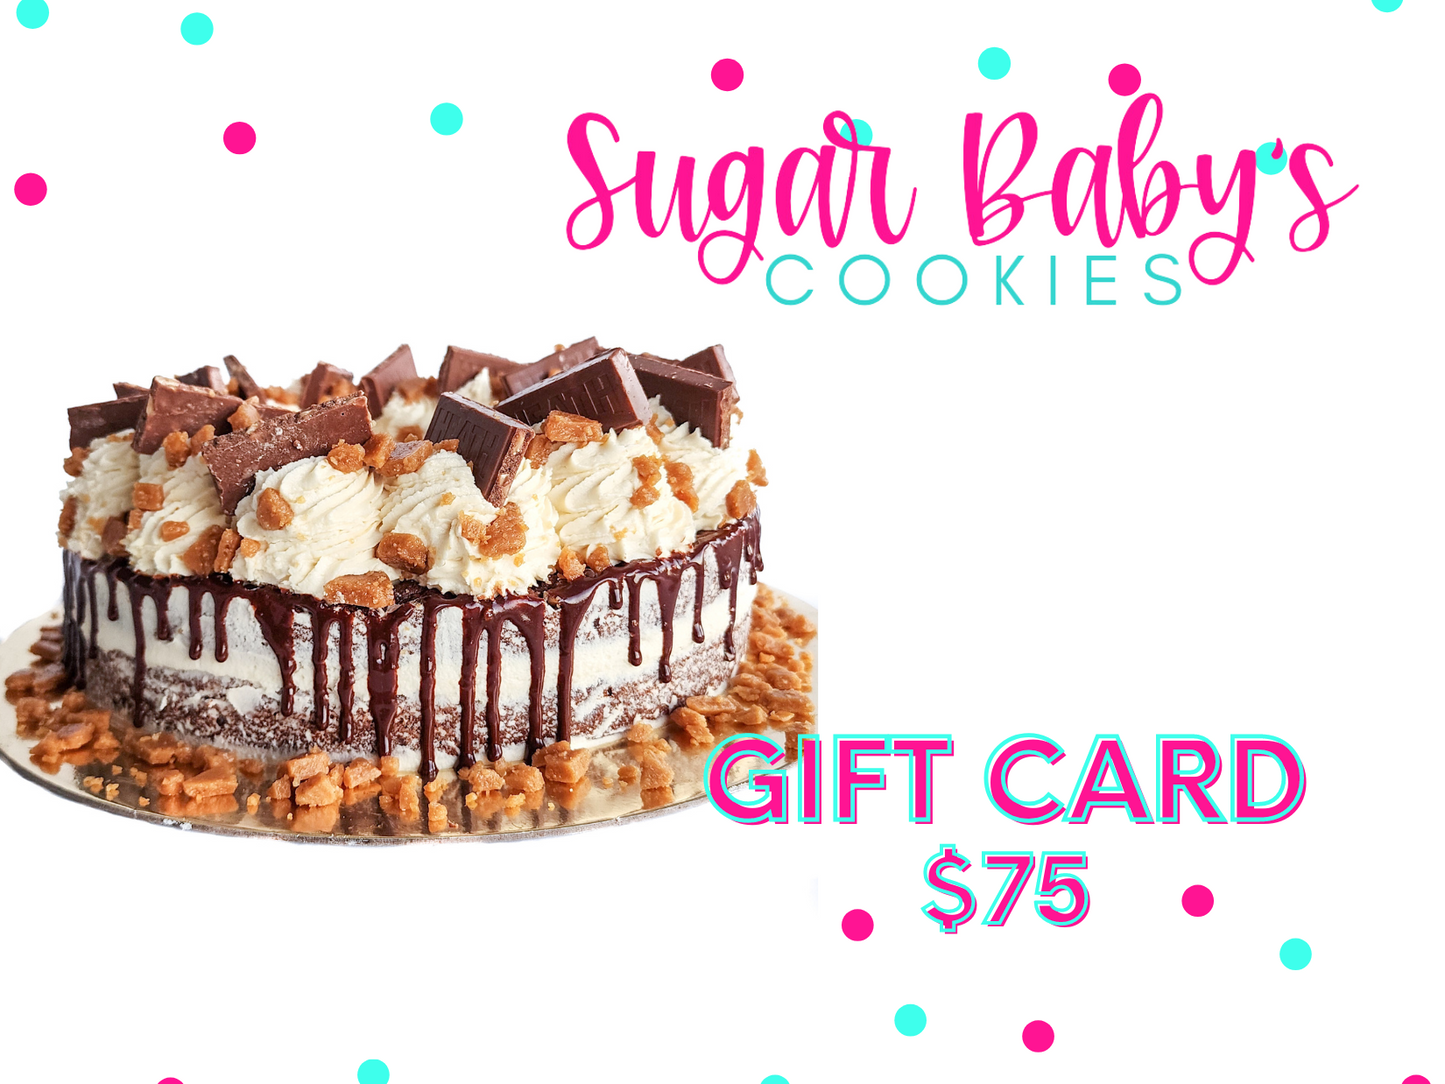 Sugar Baby's Cookies Gift Cards